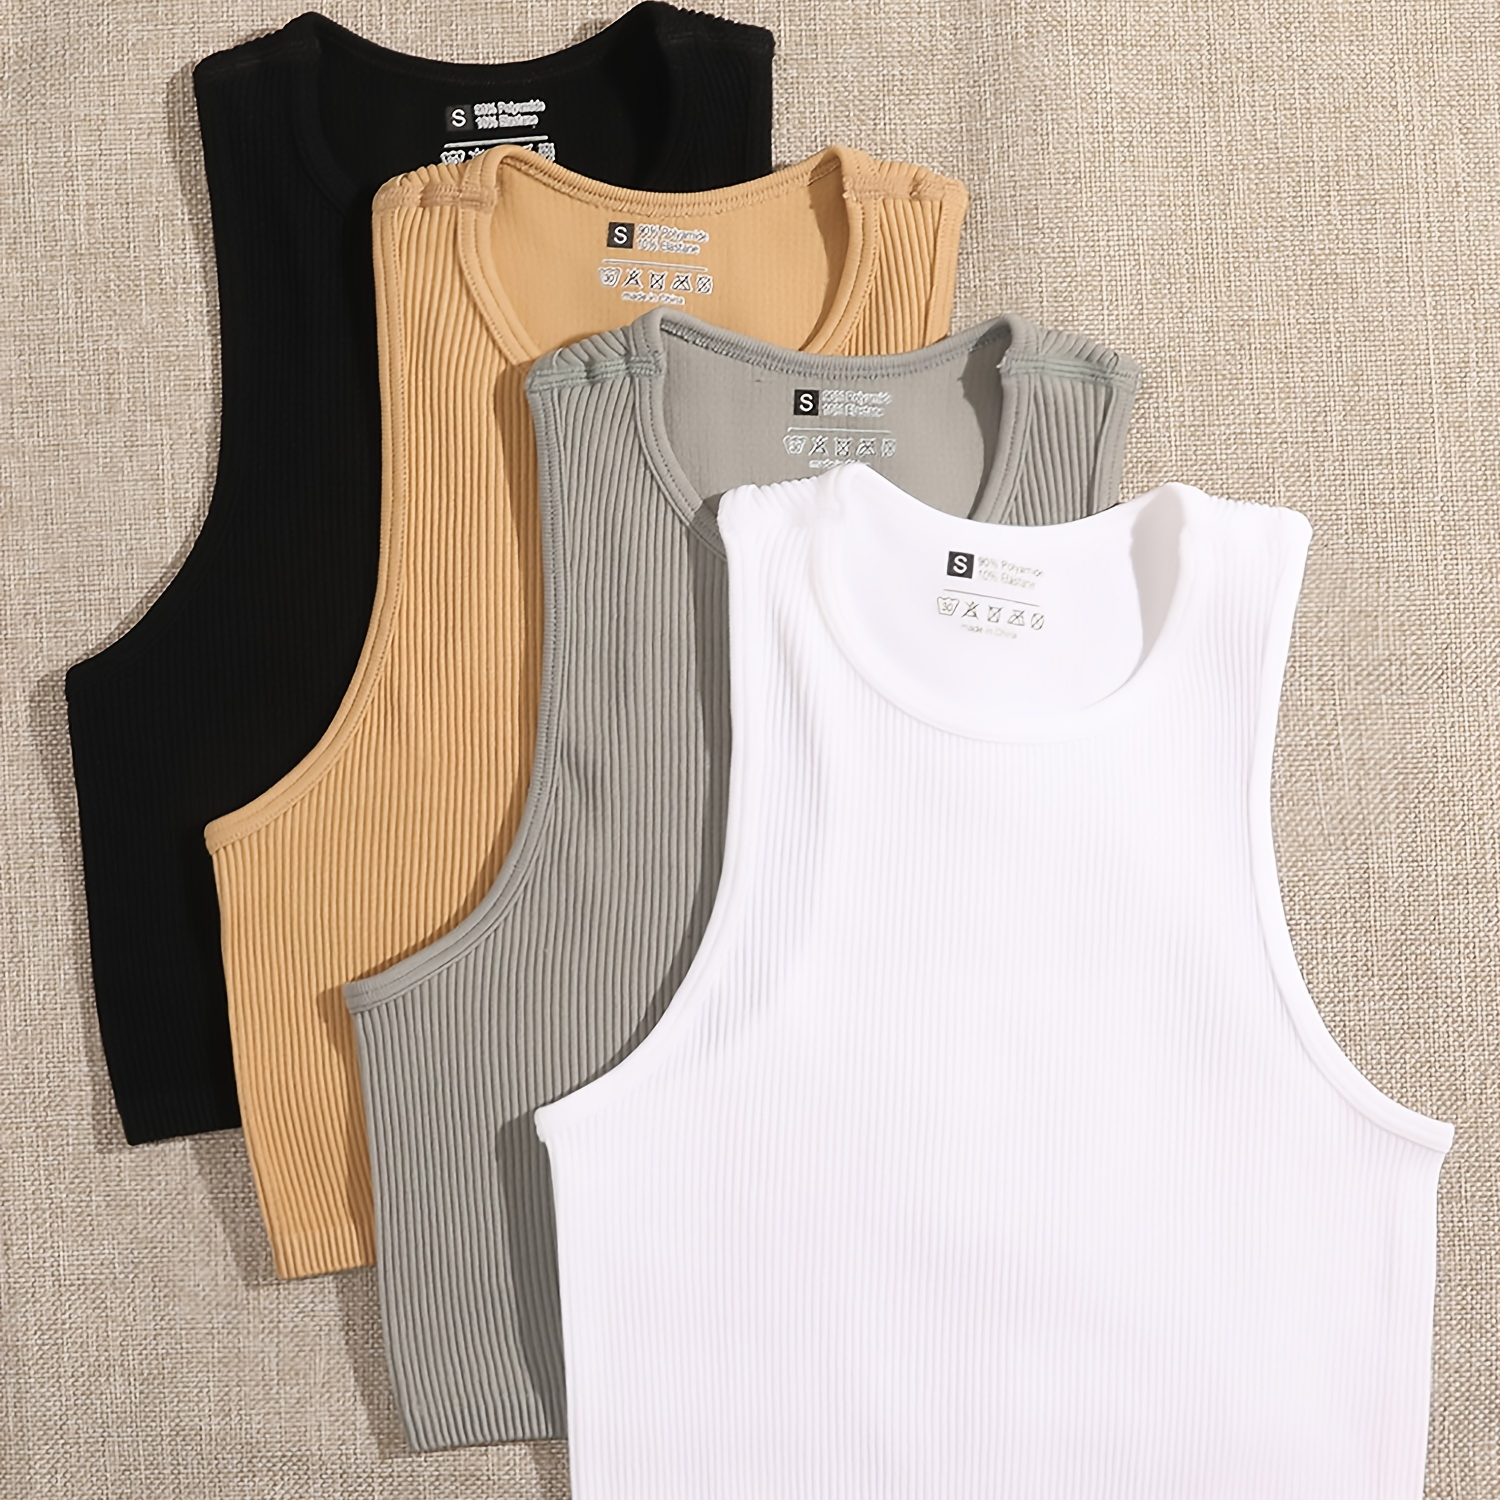 

4-pack Side Ruched Tank Tops - Sleek Y2k Crew Neck Design, Comfy Blend, Perfect For Summer Casual - Women's Fashion Sports Tops